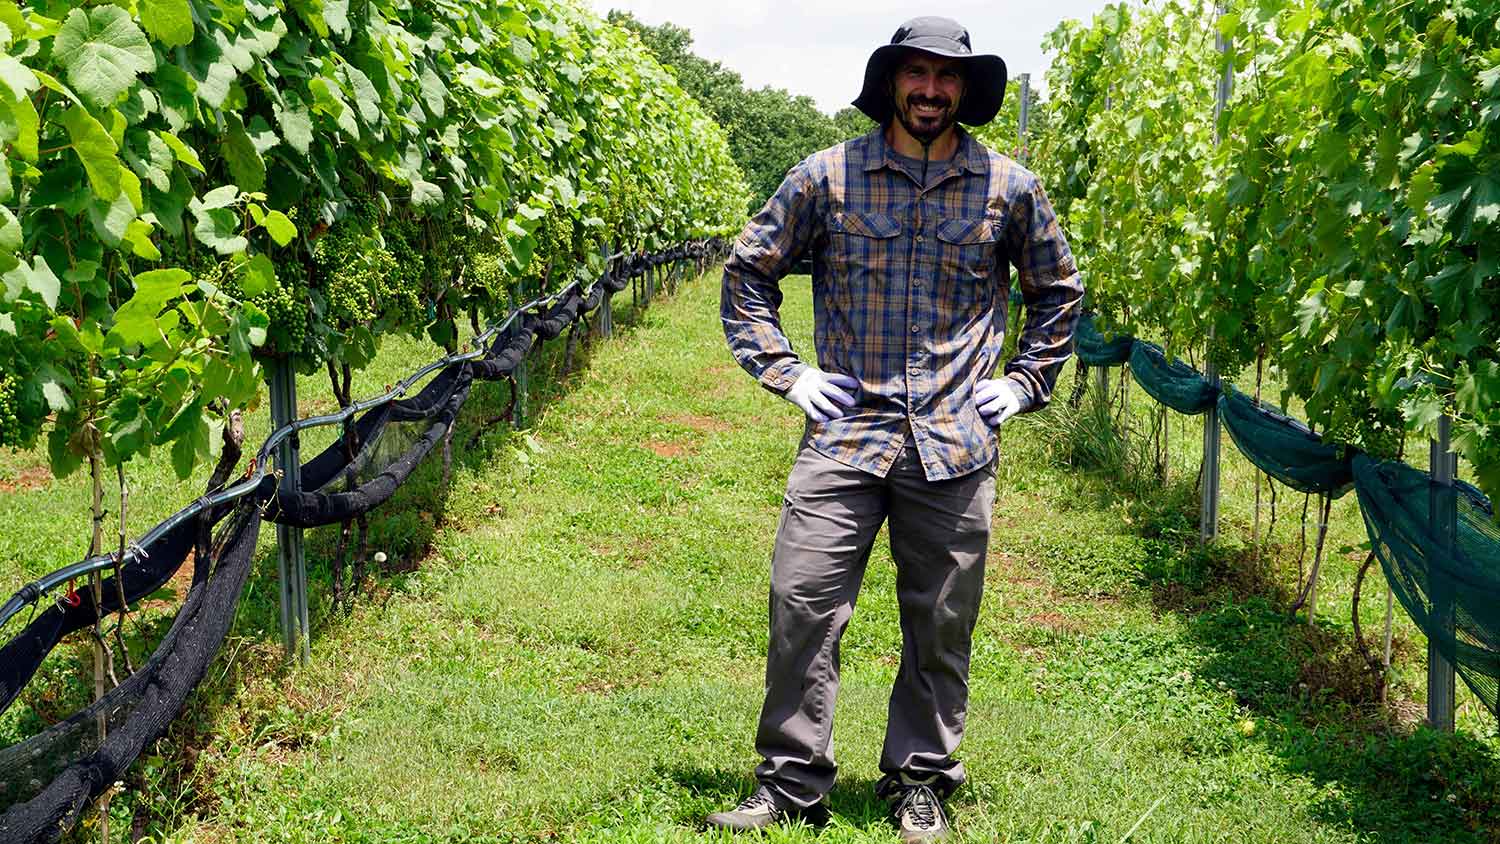 Kyle Freedman, Horticultural Science PhD viticulture candidate, amongst the grapevines.